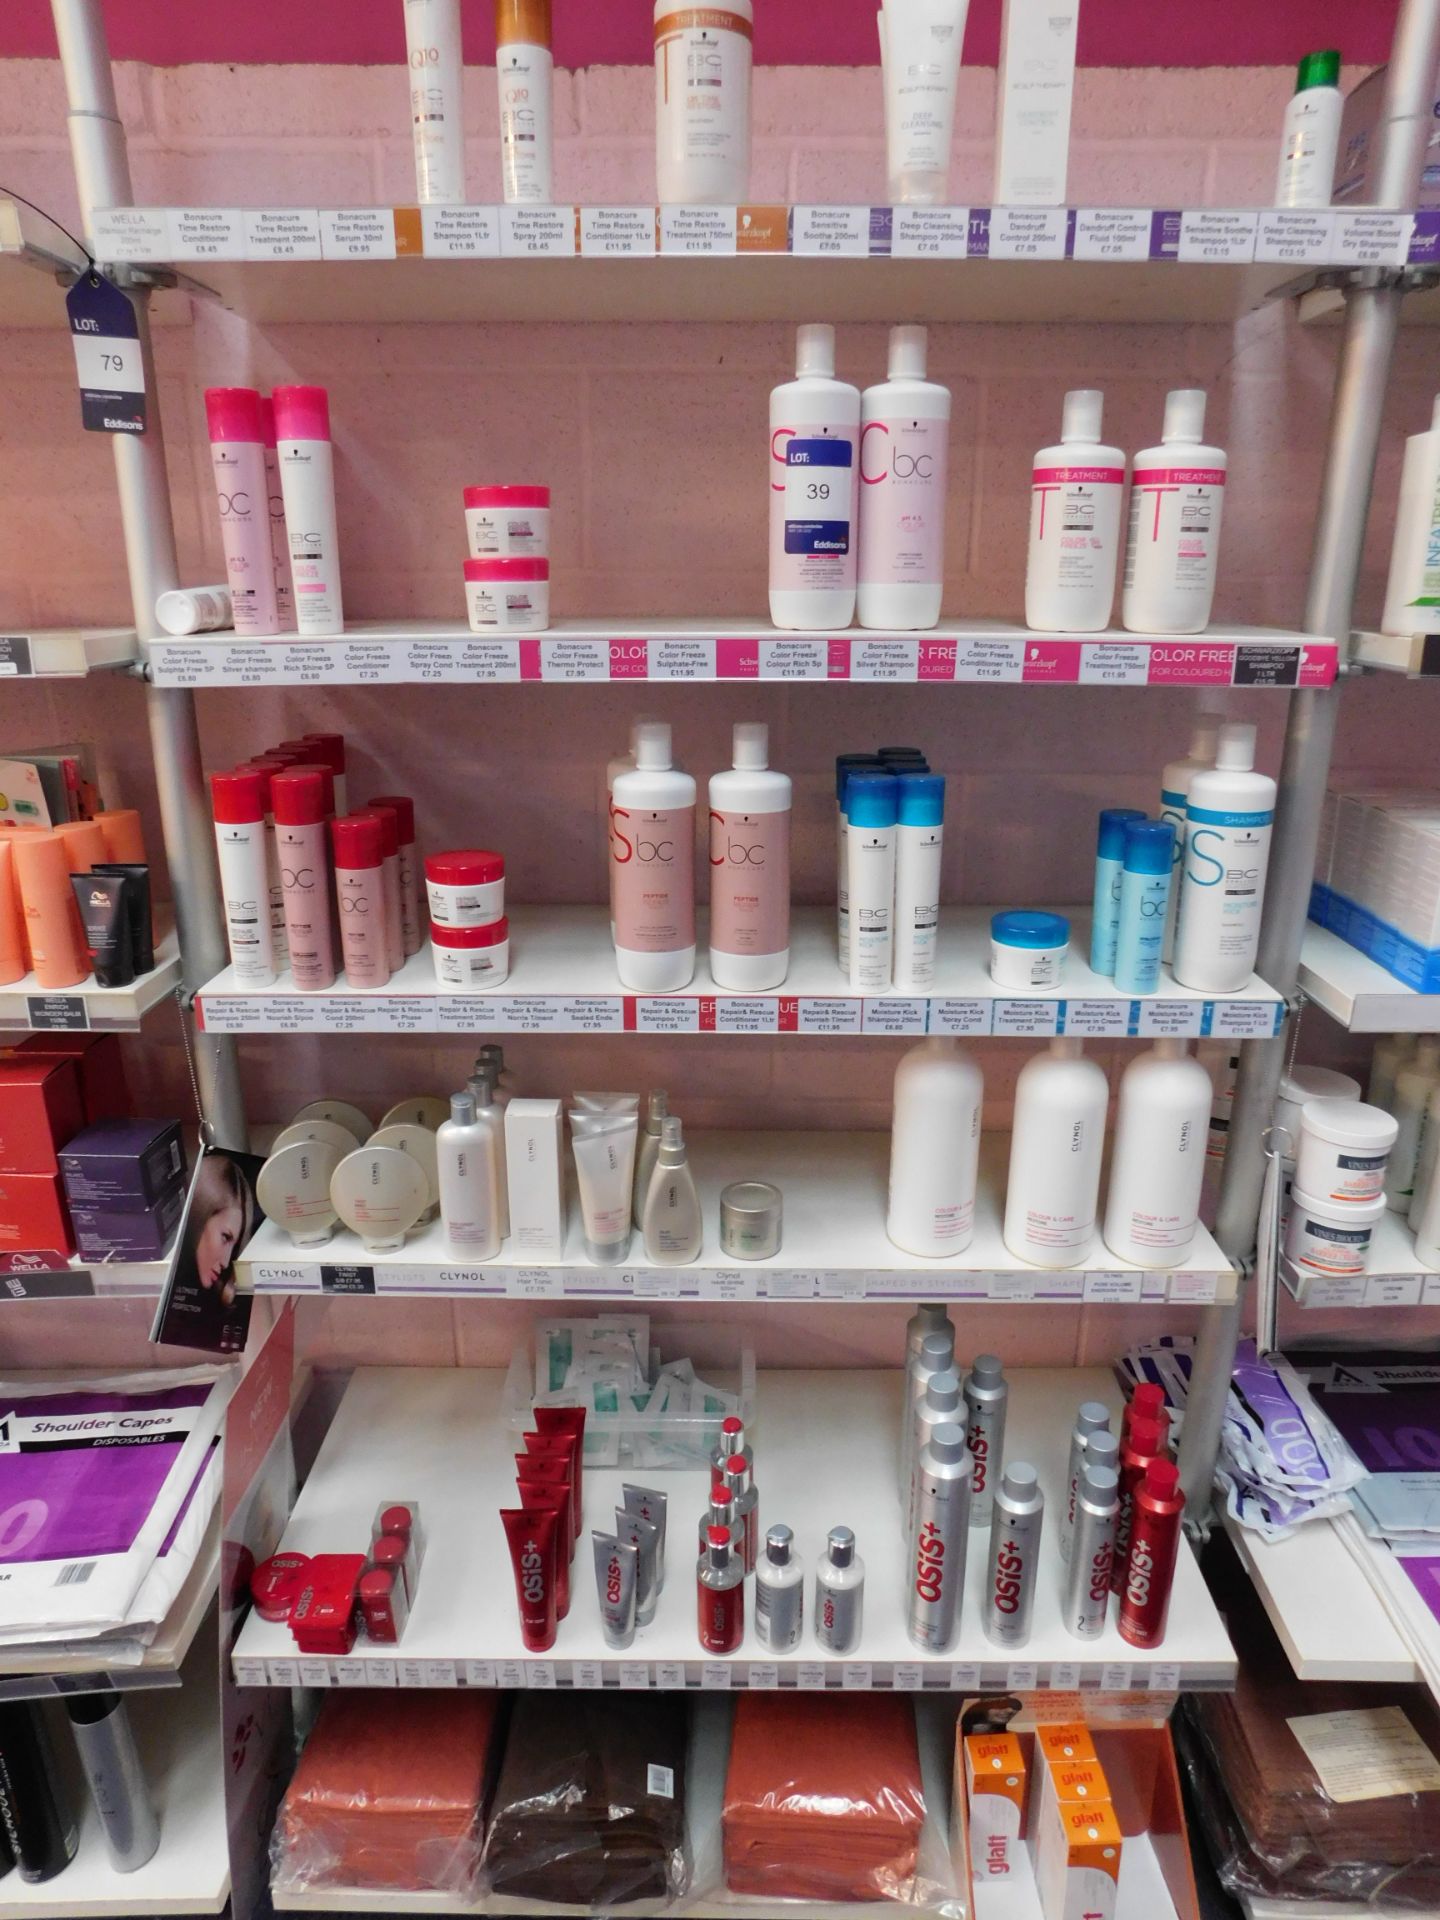 Contents to 1 bay of shop display shelving, to include hair repair products, colour treatments etc